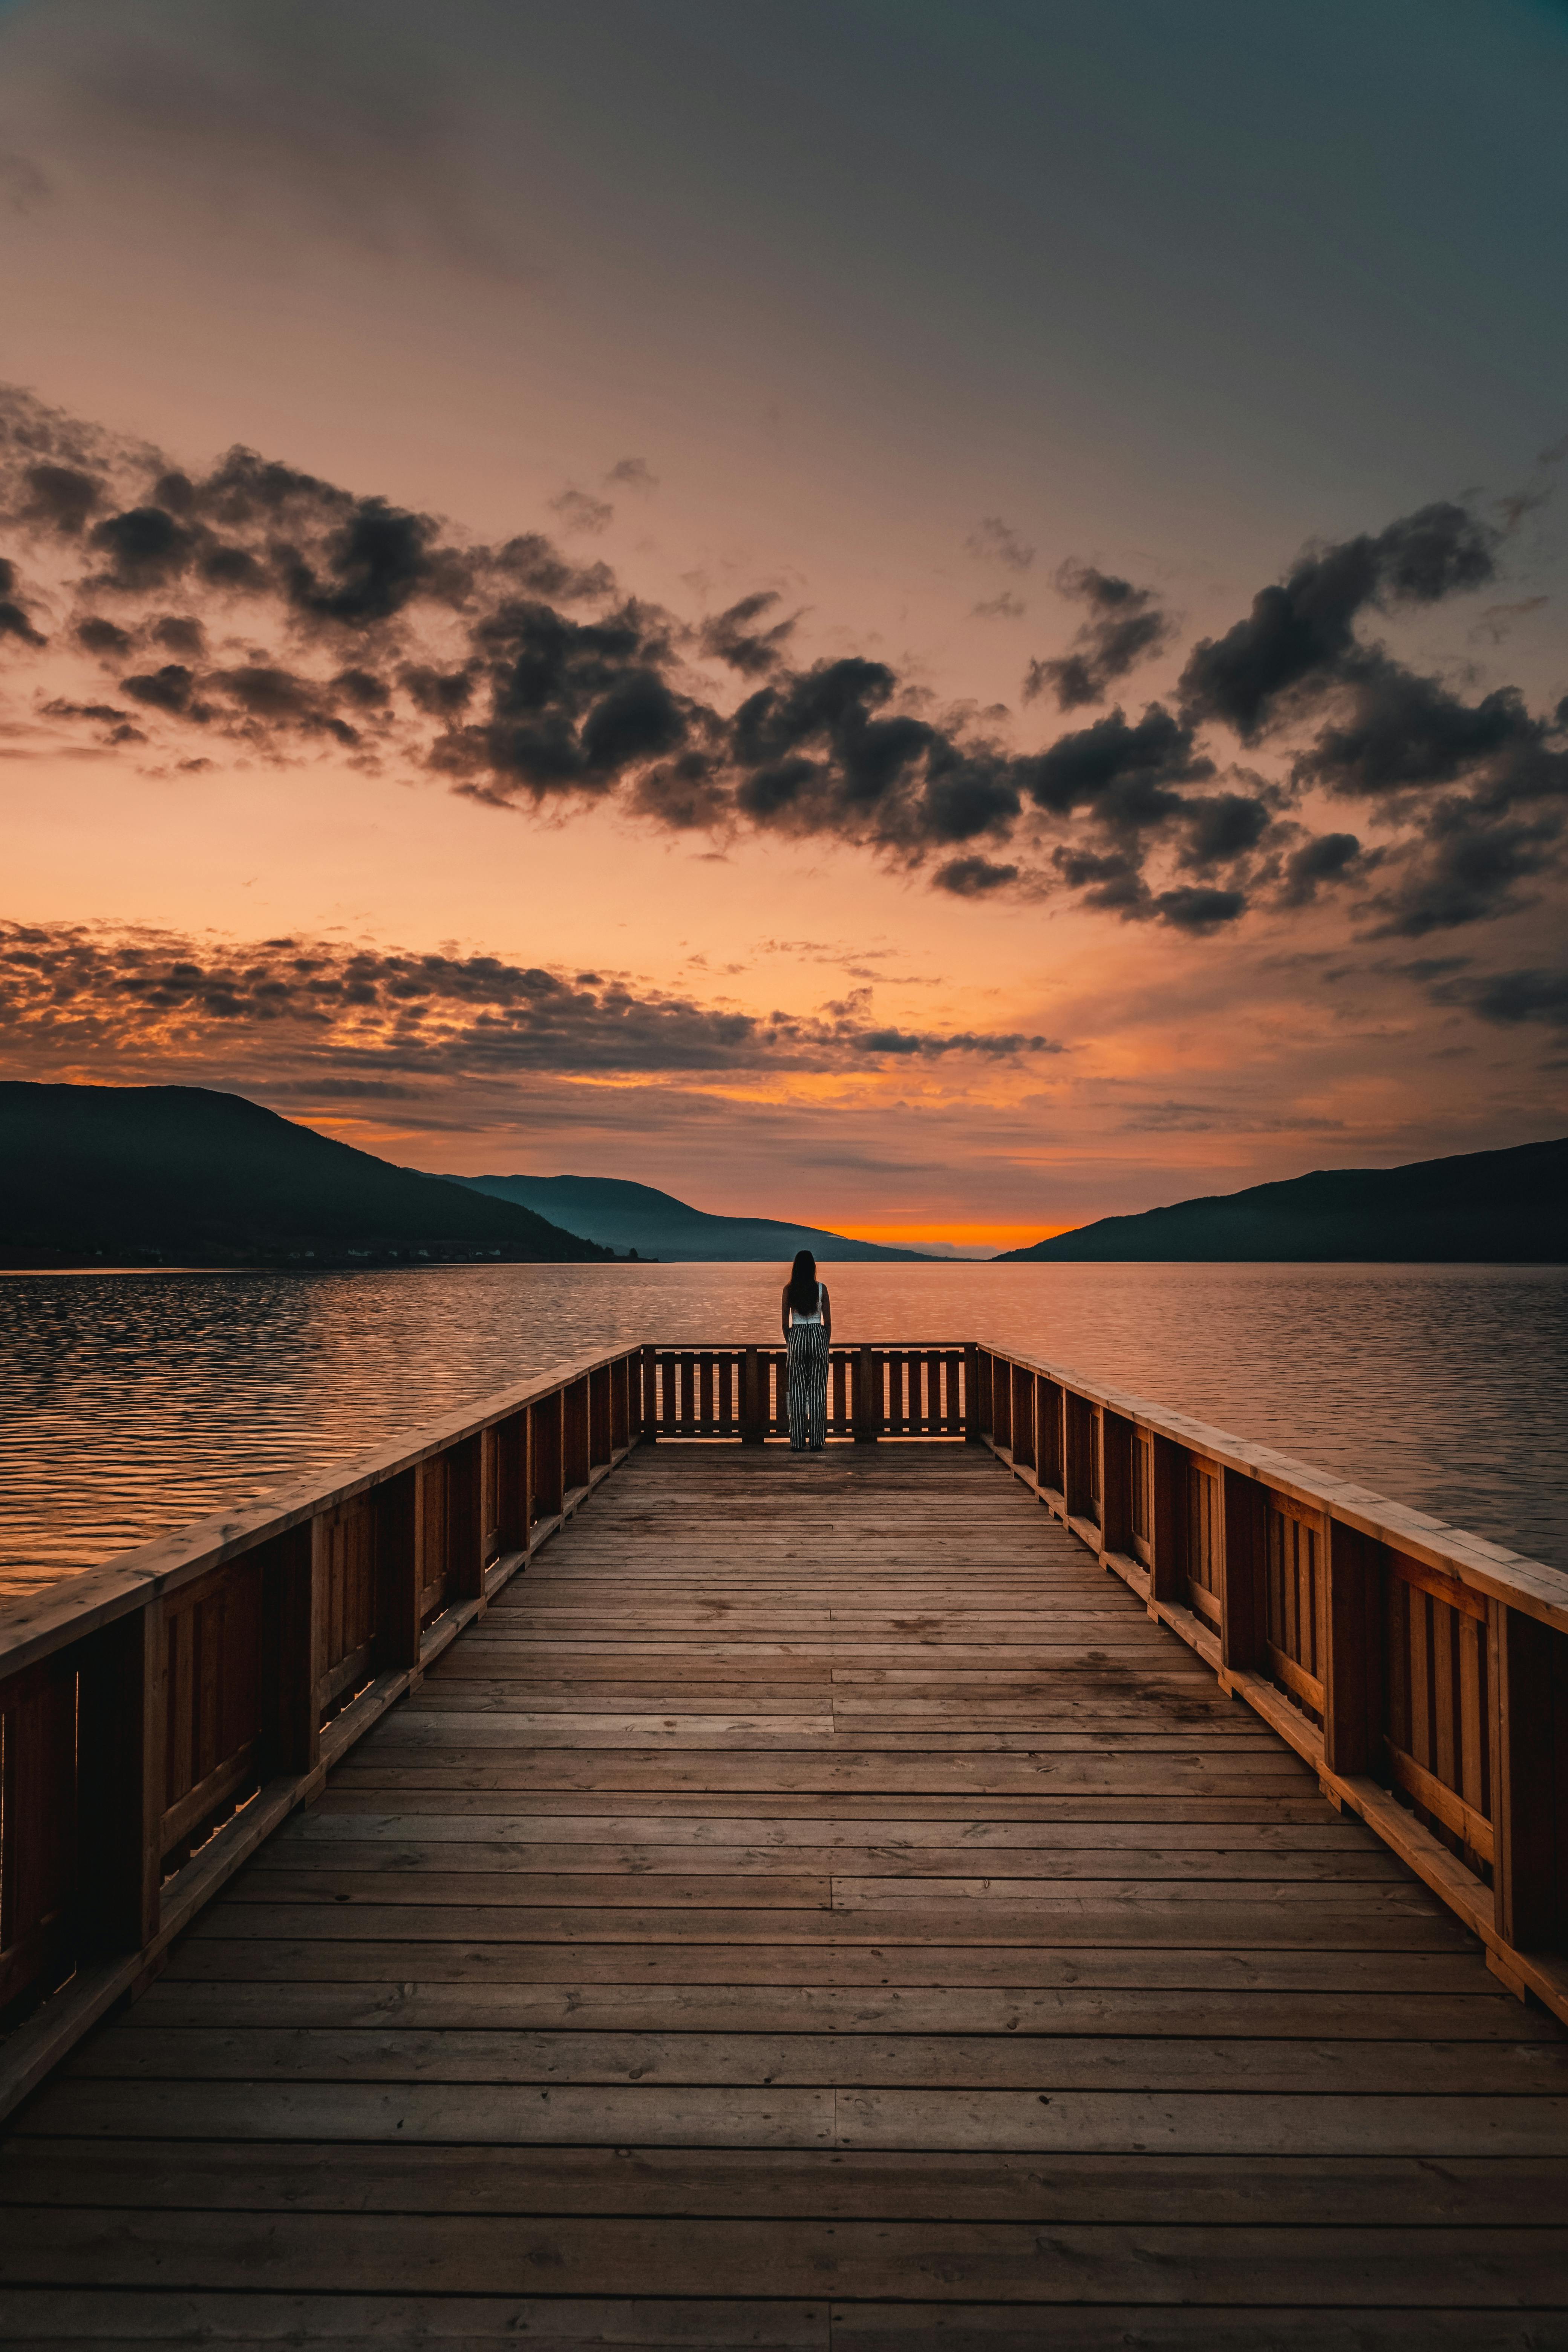 A woman enjoying the view of a sunset | Source: Pexels